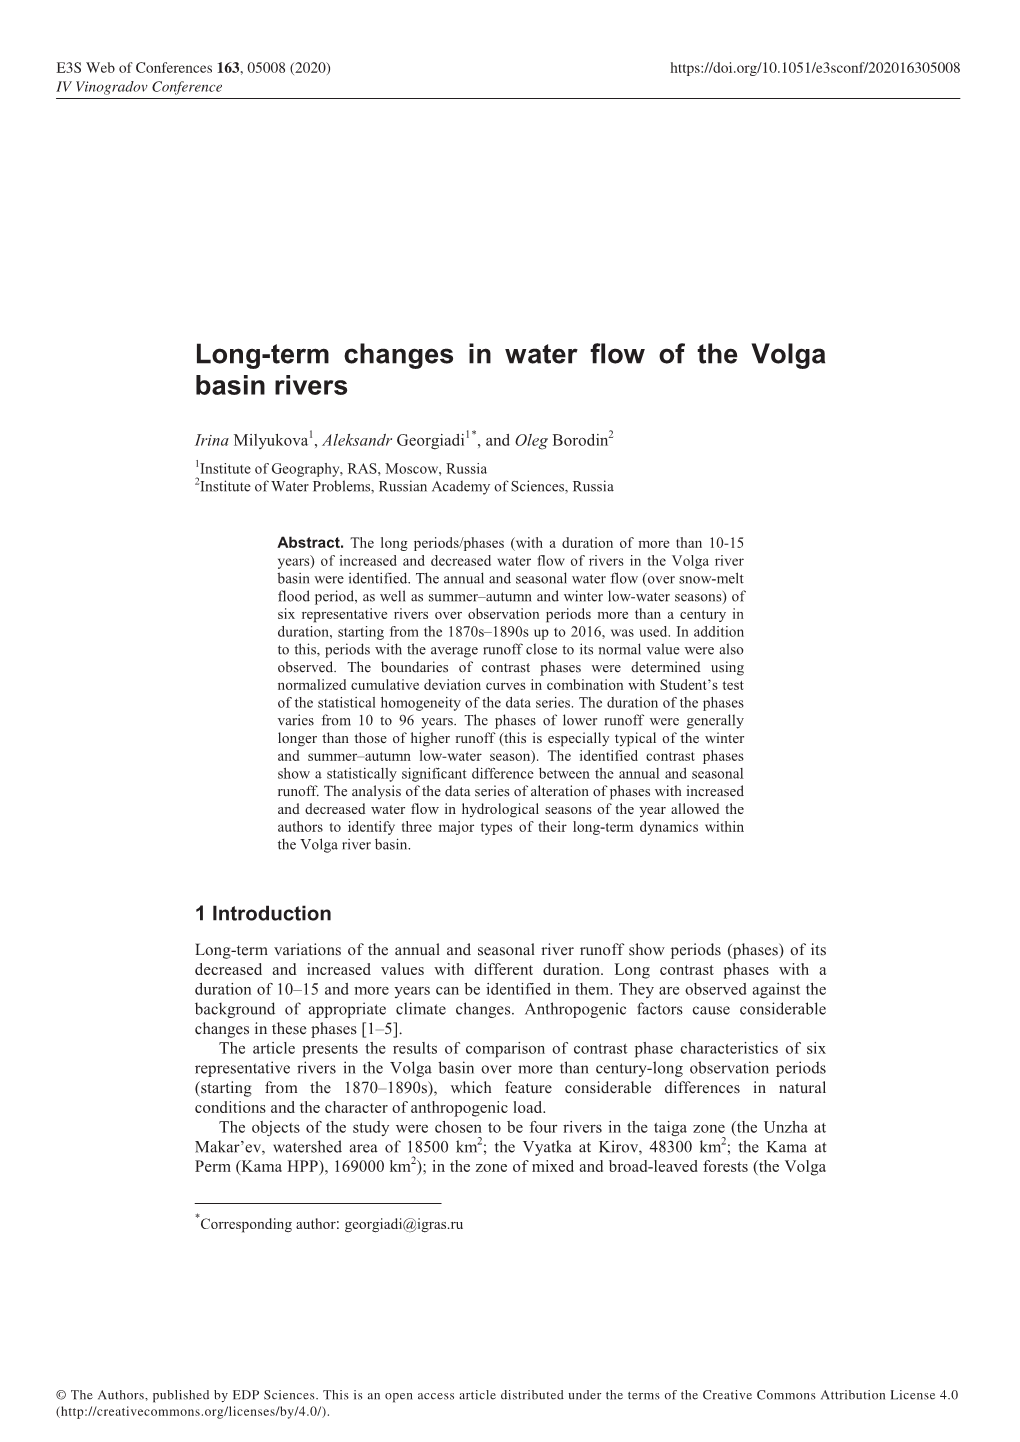 Long-Term Changes in Water Flow of the Volga Basin Rivers